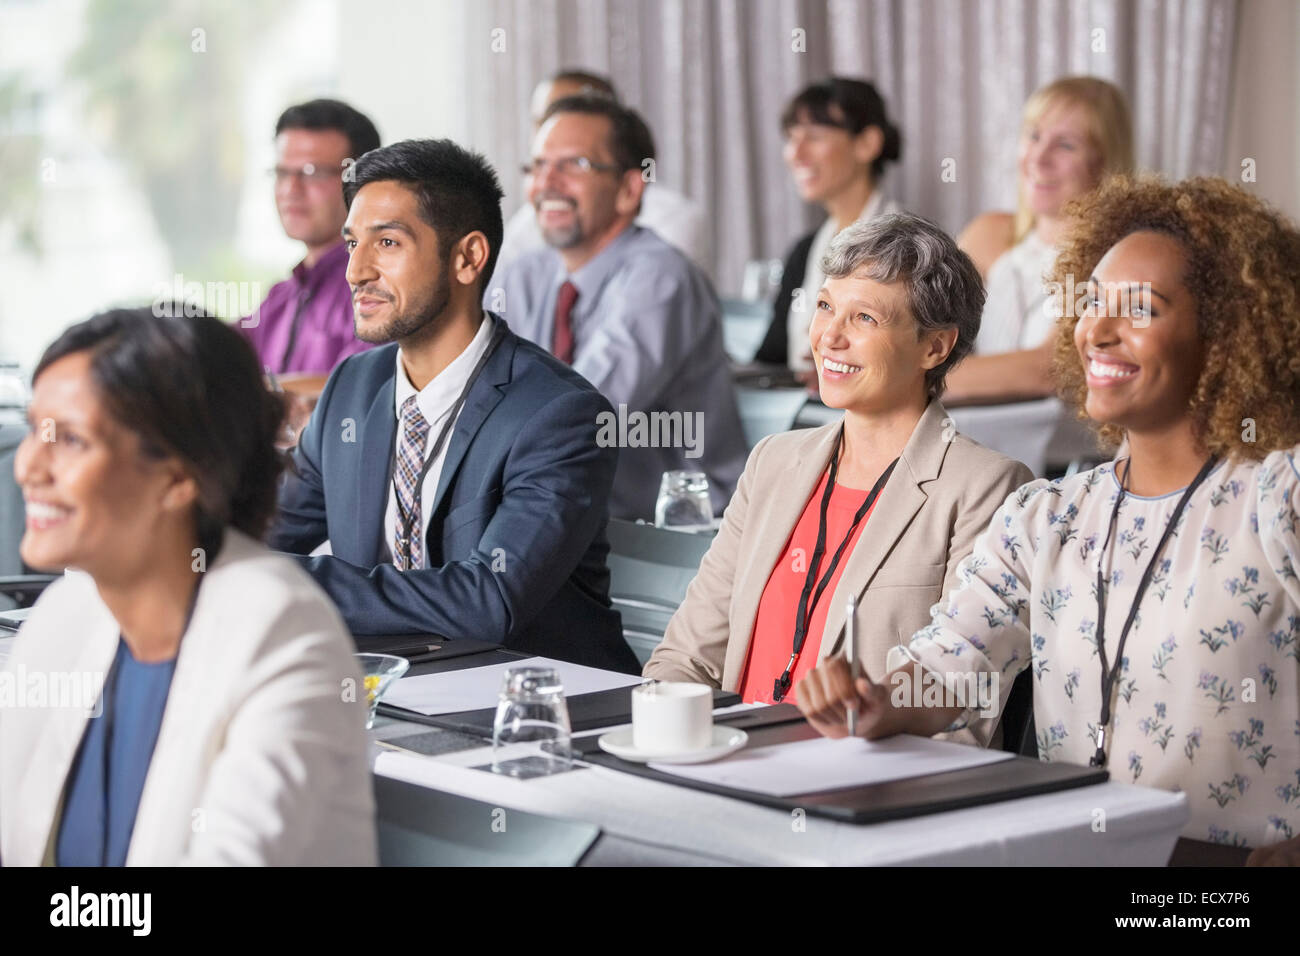 Group of people sitting and listening to speech during seminar Stock Photo